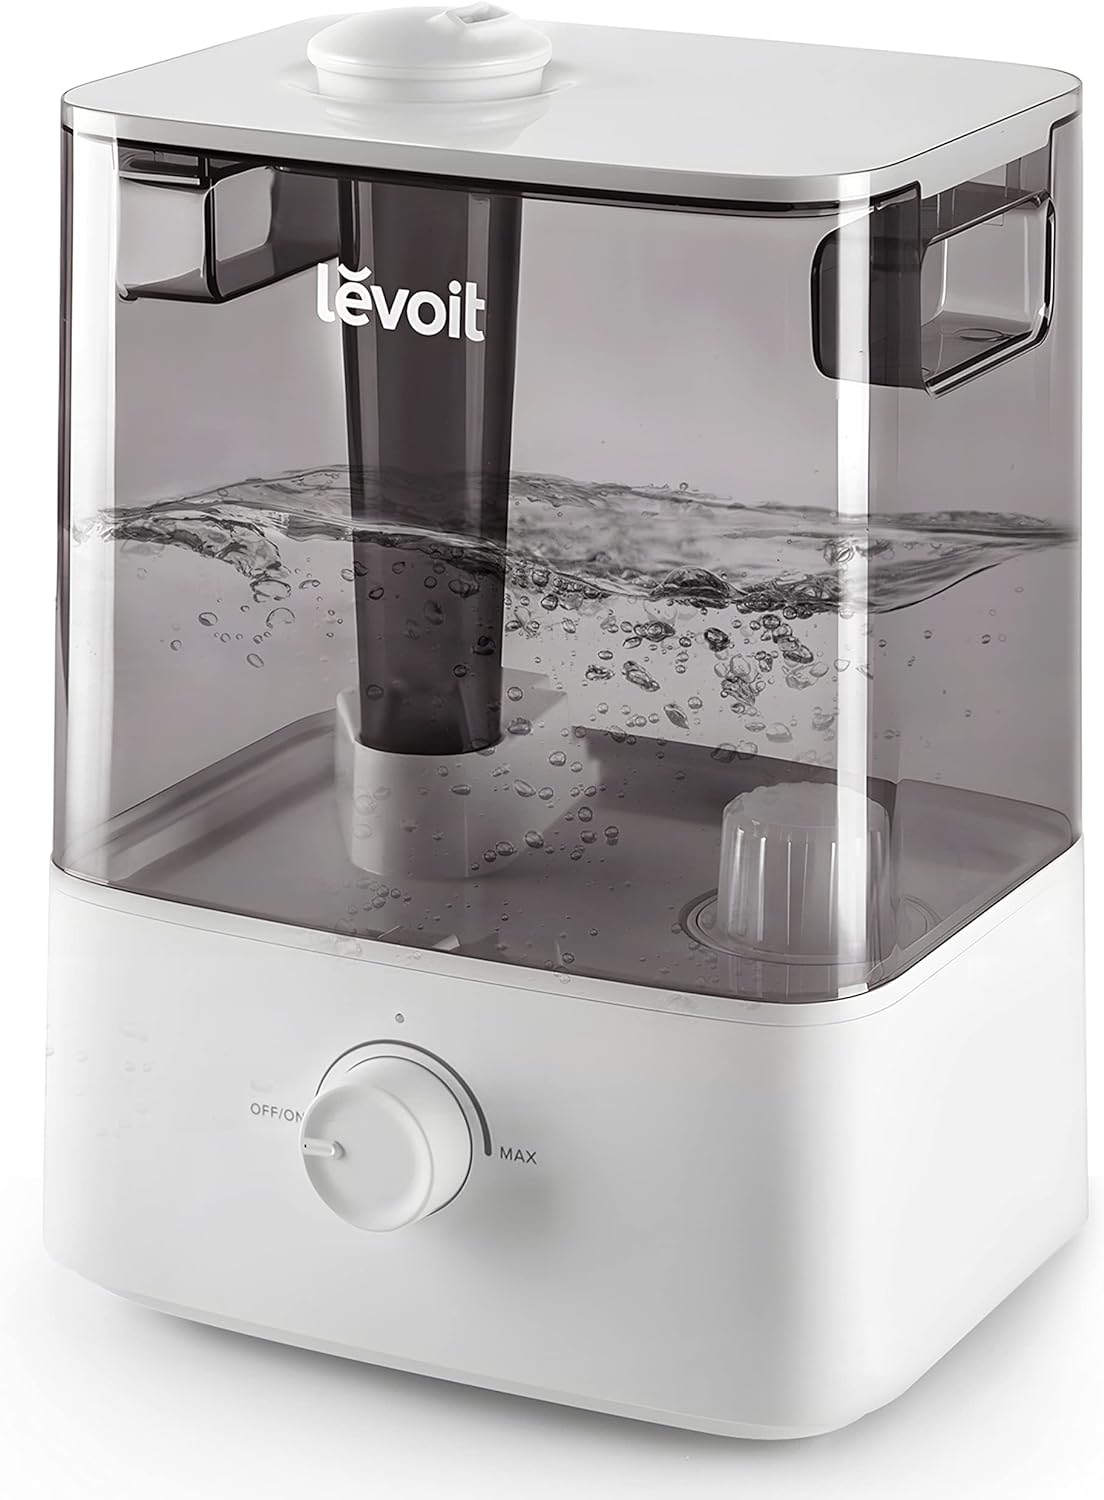 LEVOIT Classic300 Ultrasonic Top Fill Humidifier, Extra Large 6L Tank Last 60-Hour - Super Quiet, Easy to Use and Clean, 360 Rotation Nozzle, Simple Knob Control, Handle, Auto Shut Off, Gray